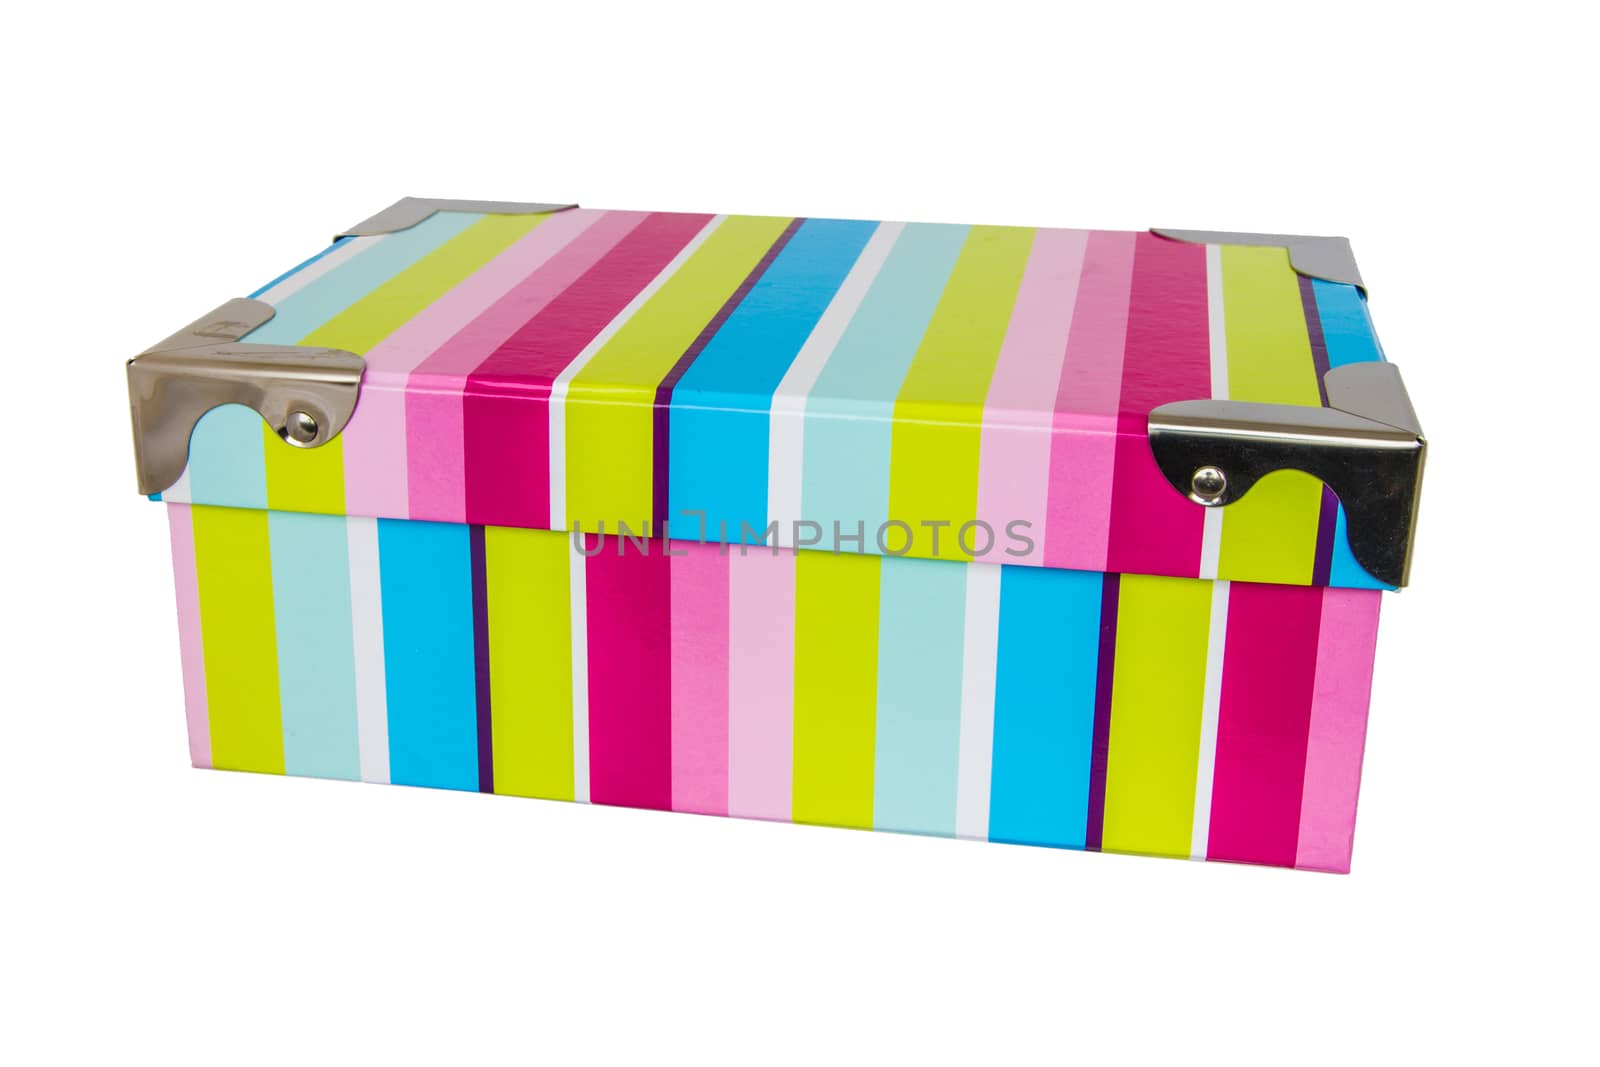 A very colorful box to contain documents